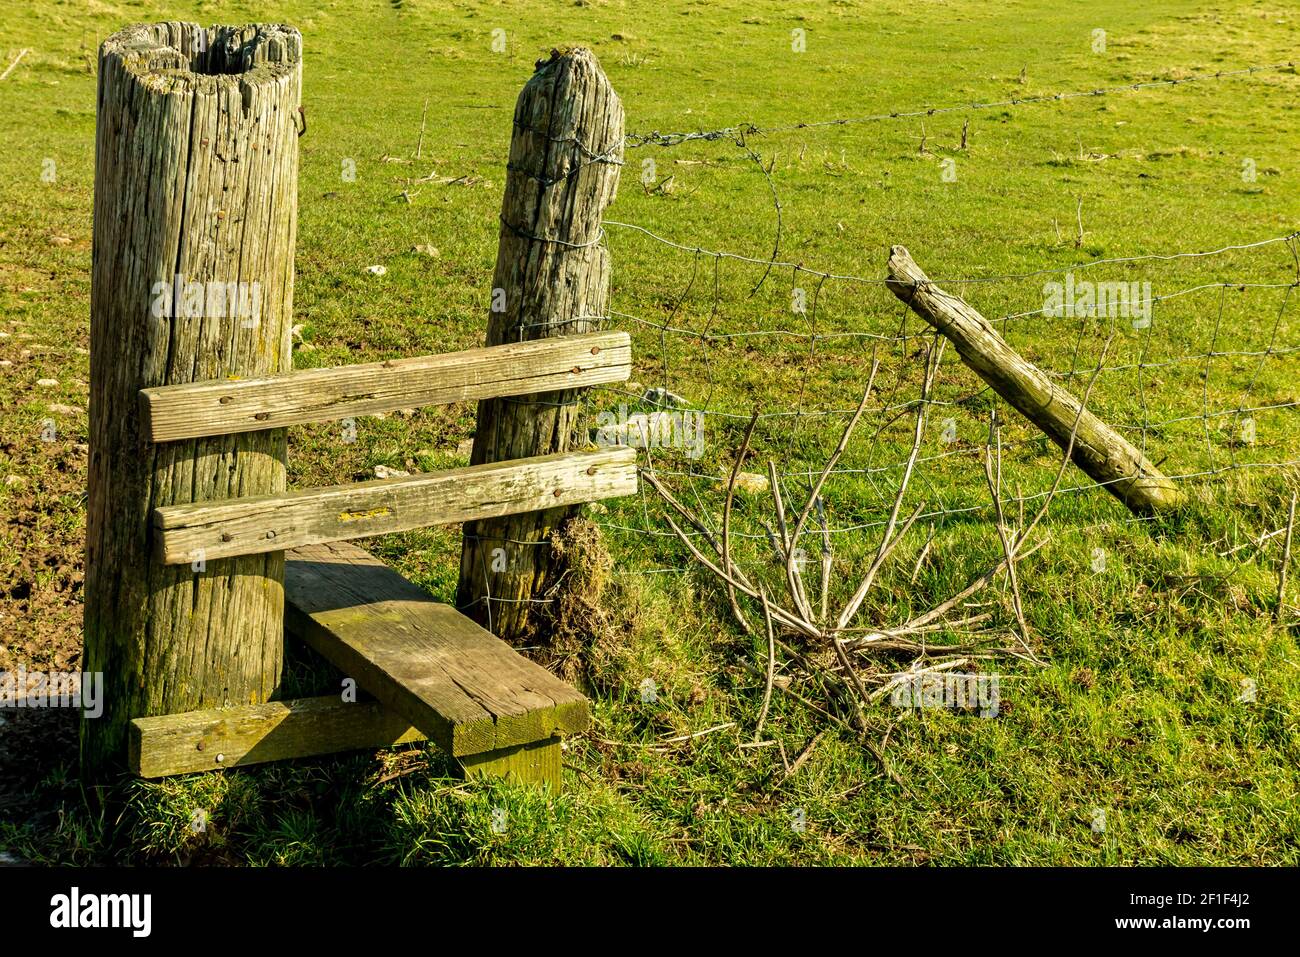 Wooden stile on a public footpath in a field in the British countryside. Stock Photo